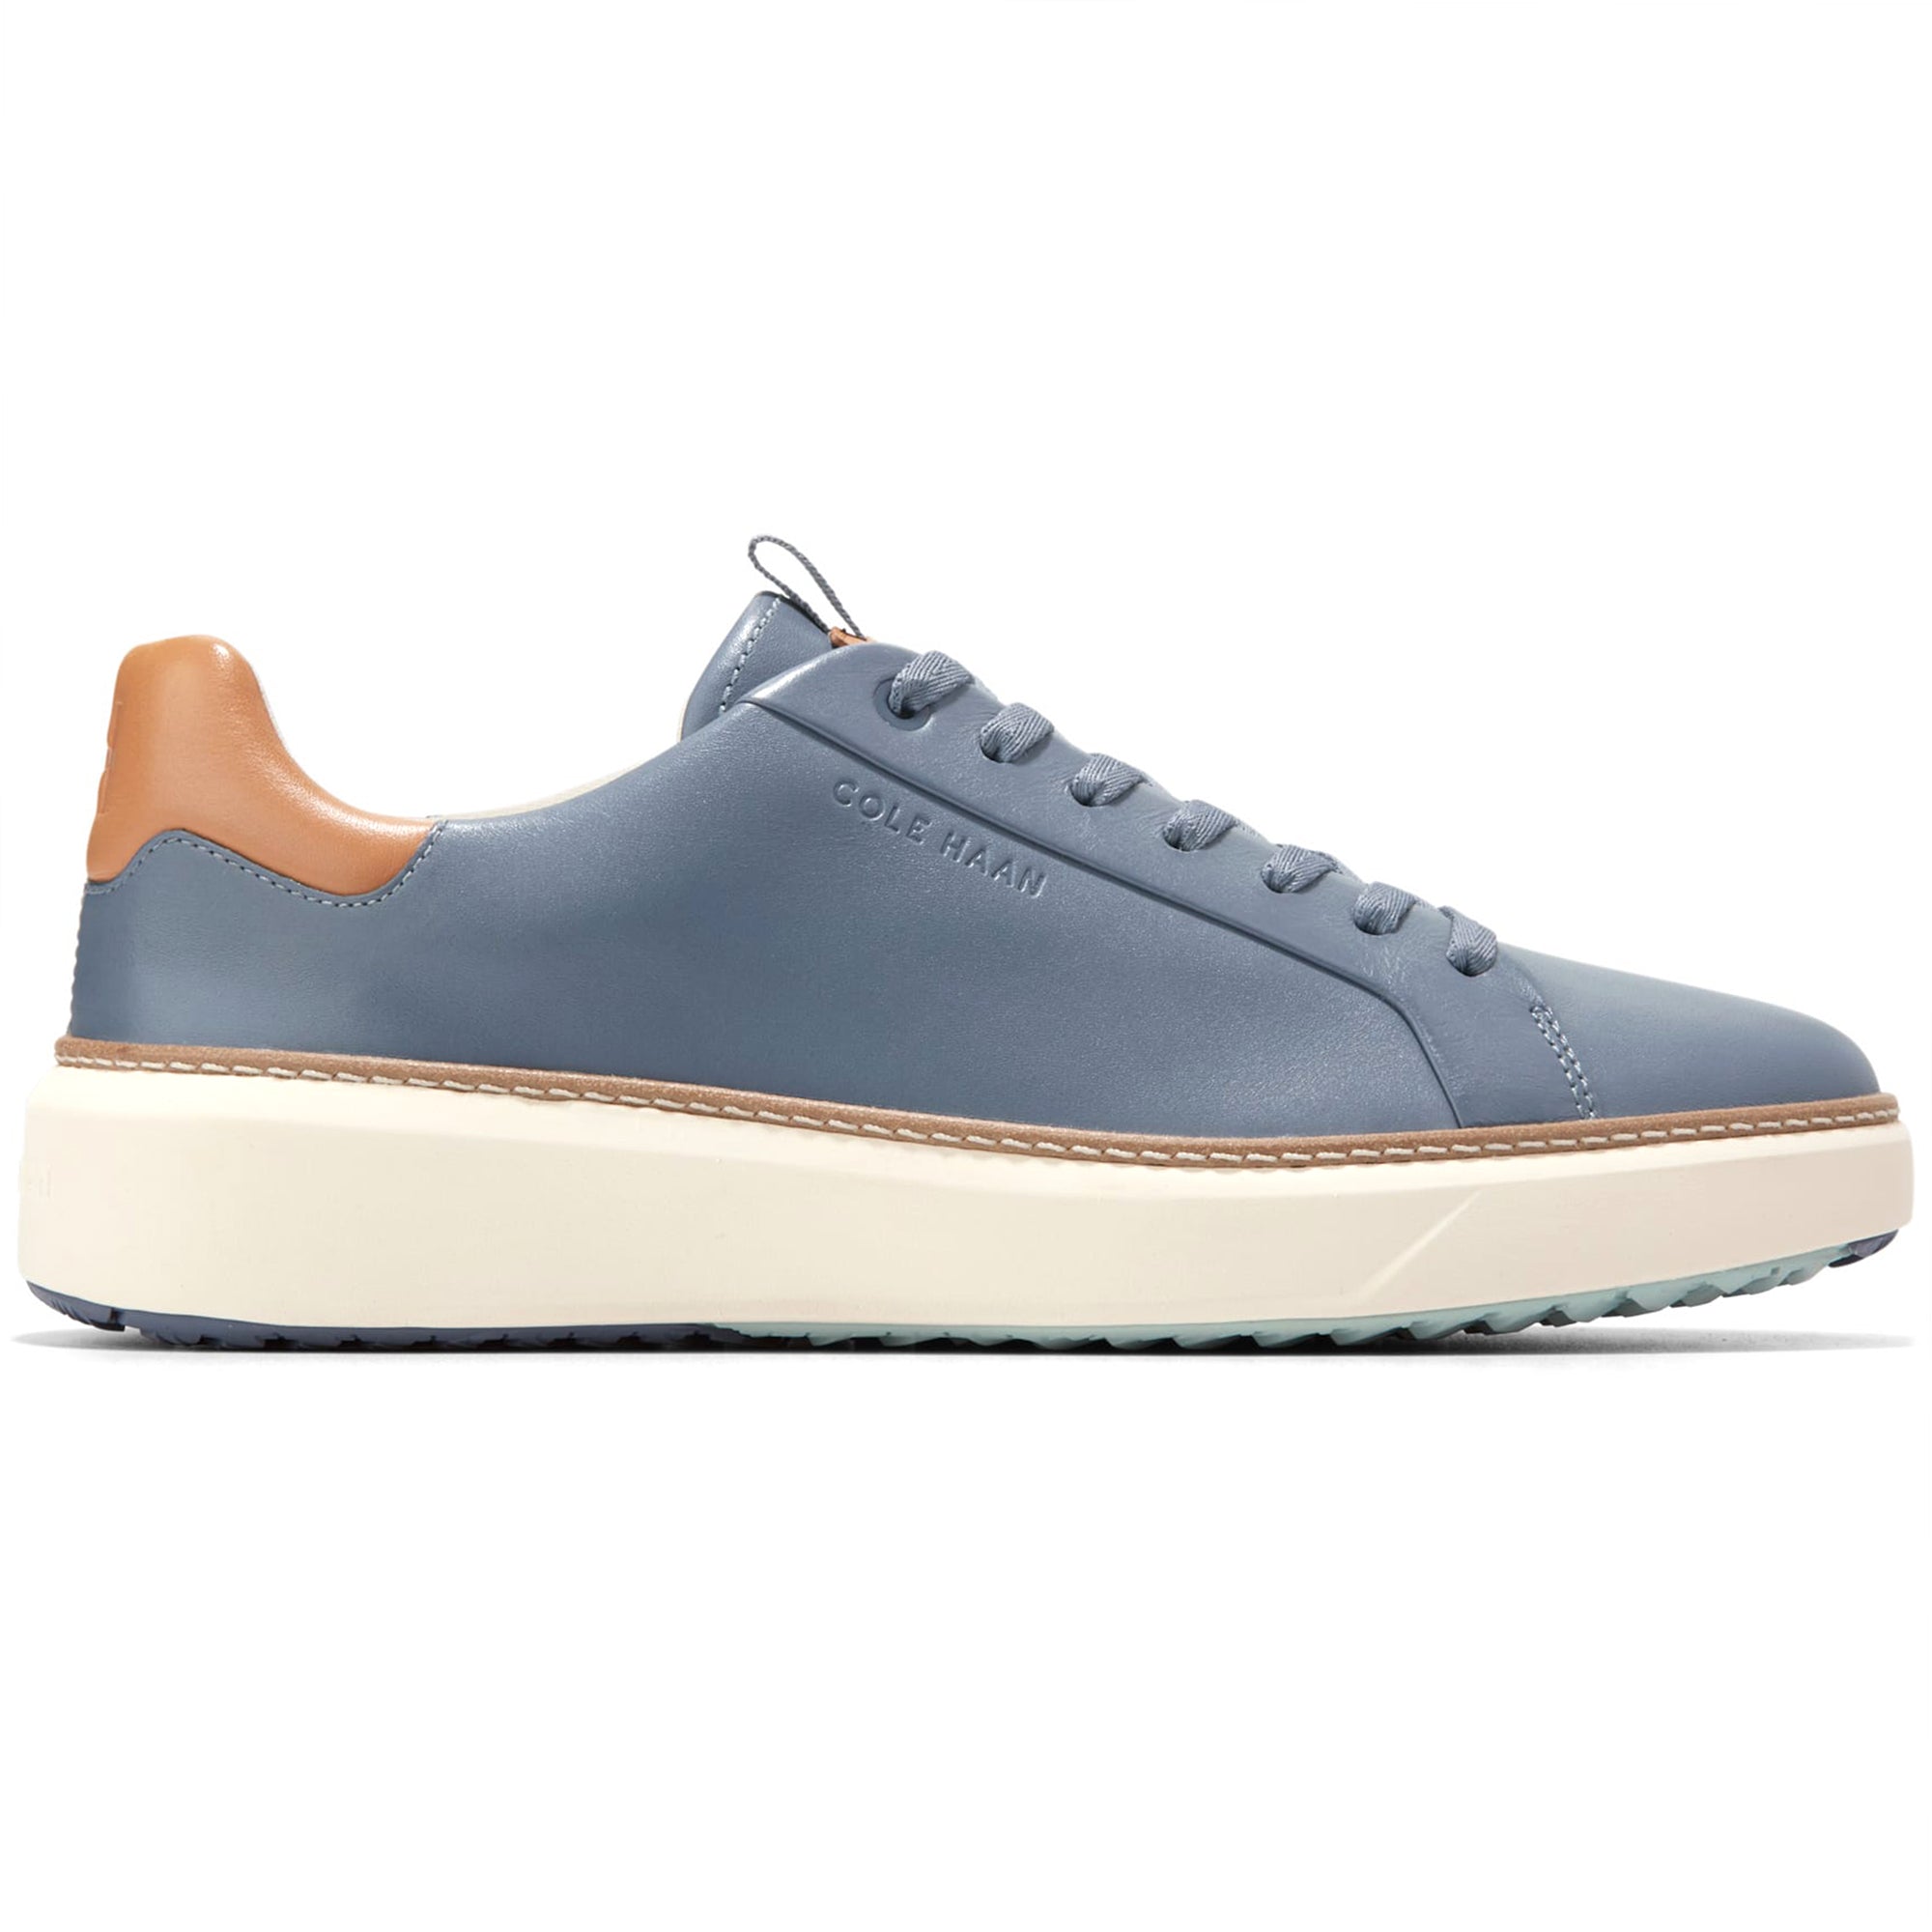 cole-haan-grandpro-topspin-golf-shoes-c38978-folkstone-grey-natural-tan-ivory